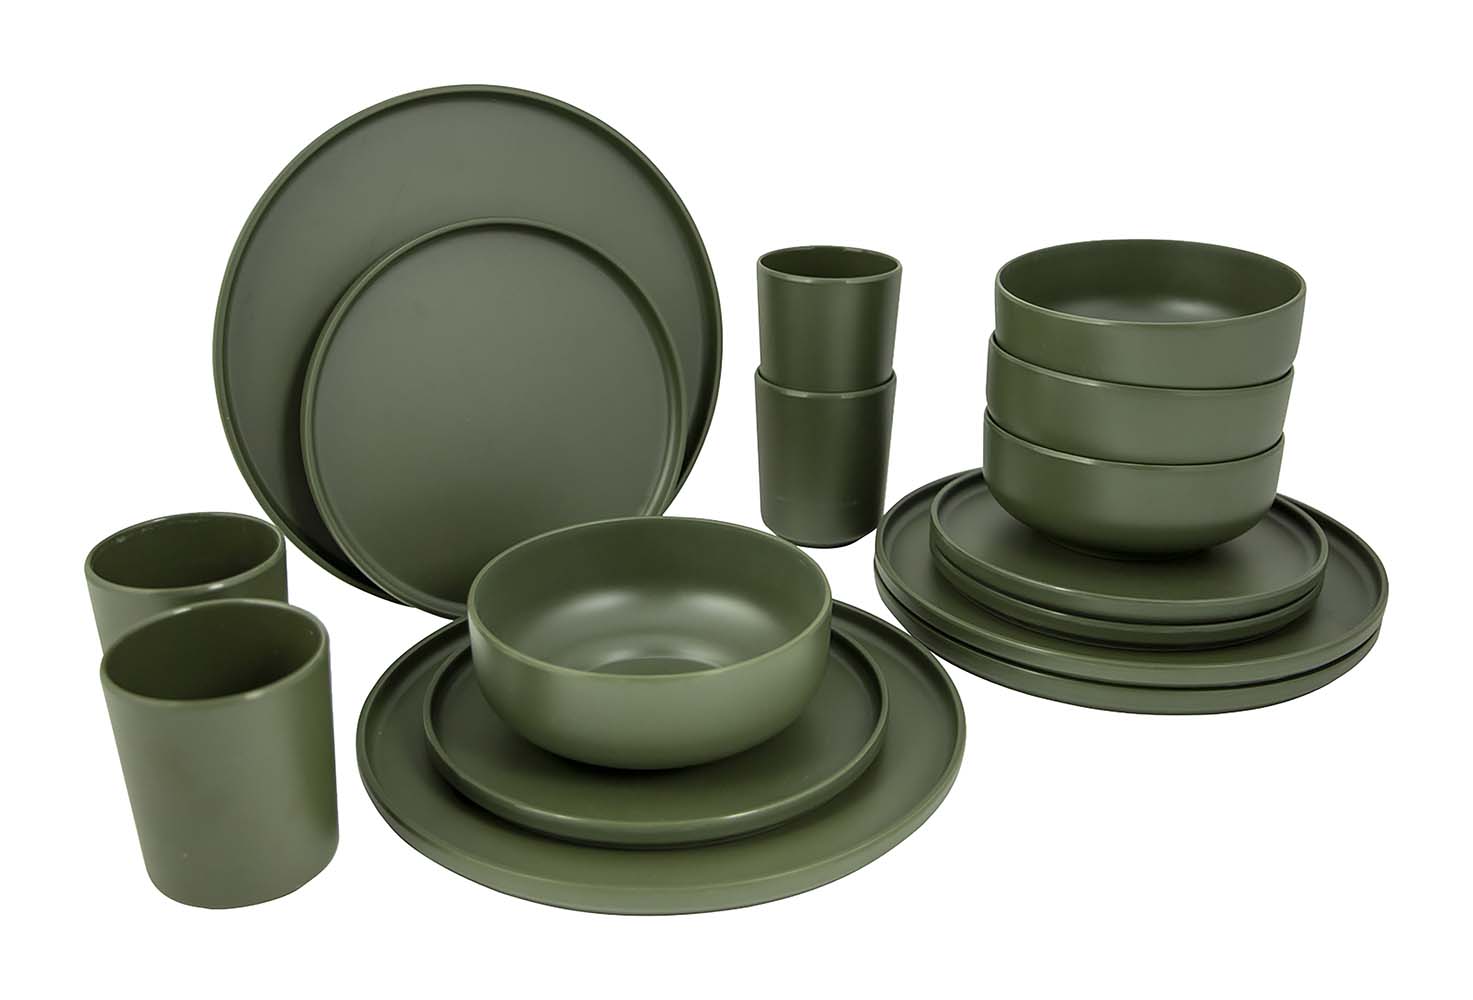 6181452 This Industrial Patom dinnerware set has a robust look. The green dinnerware has a sturdy look with raised edge. Besides the beautiful design, the dinnerware is very light and sturdy. The dinnerware is good to use on the campsite, as it is virtually unbreakable, shatterproof and scratch-resistant. The dinnerware can also be used perfectly at home. The 16-piece set is made of high quality 100% melamine and is dishwasher safe and food approved. This stylish set is suitable for 4 people and includes 4 dinner plates, 4 breakfast plates, 4 bowls and 4 mugs. Dimensions: Ø Plate: 26 cm. Ø Plate: 20 cm. Ø Bowl: 15 cm. Ø Mug: 8x10 cm. Content Bowl: 700 ml. Content Mug: 300 ml.